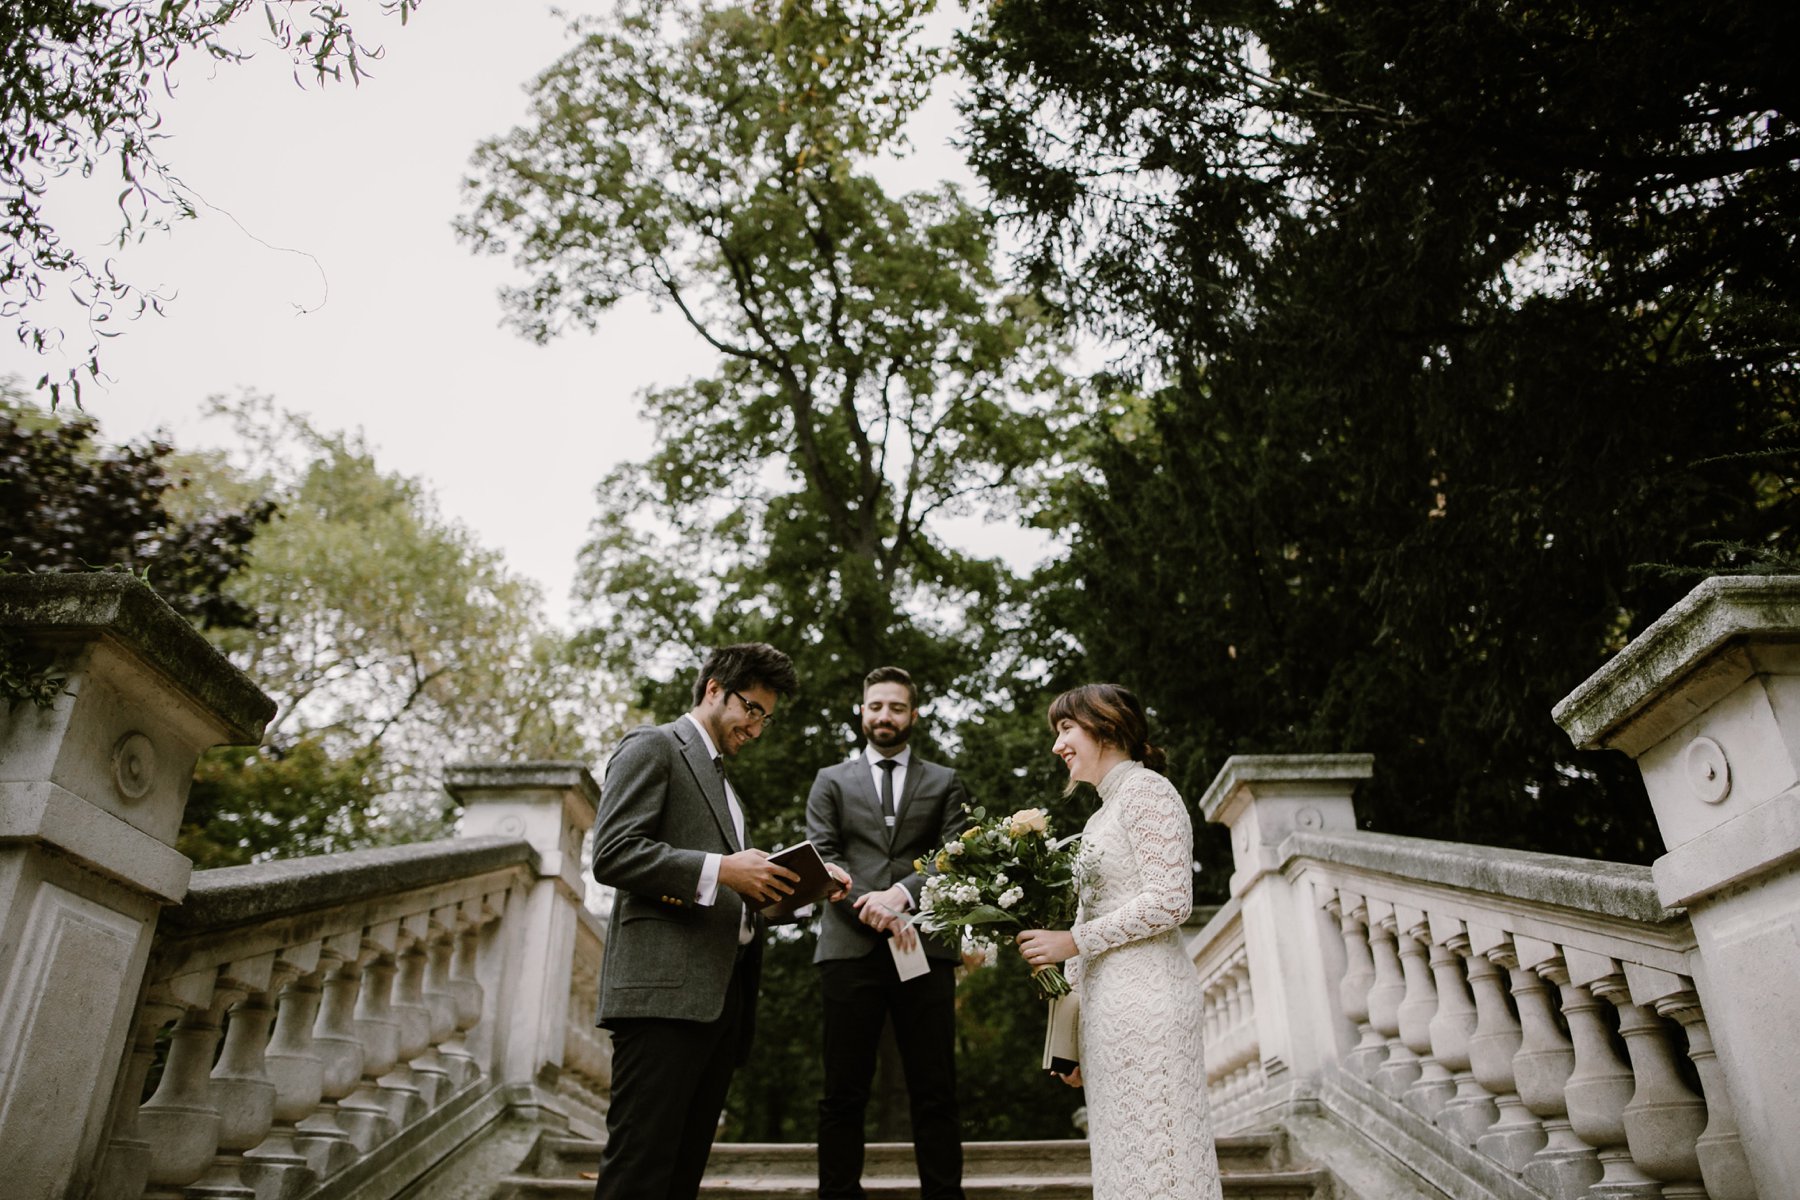 A bride and groom share their vows at their wedding at Parc Monceau